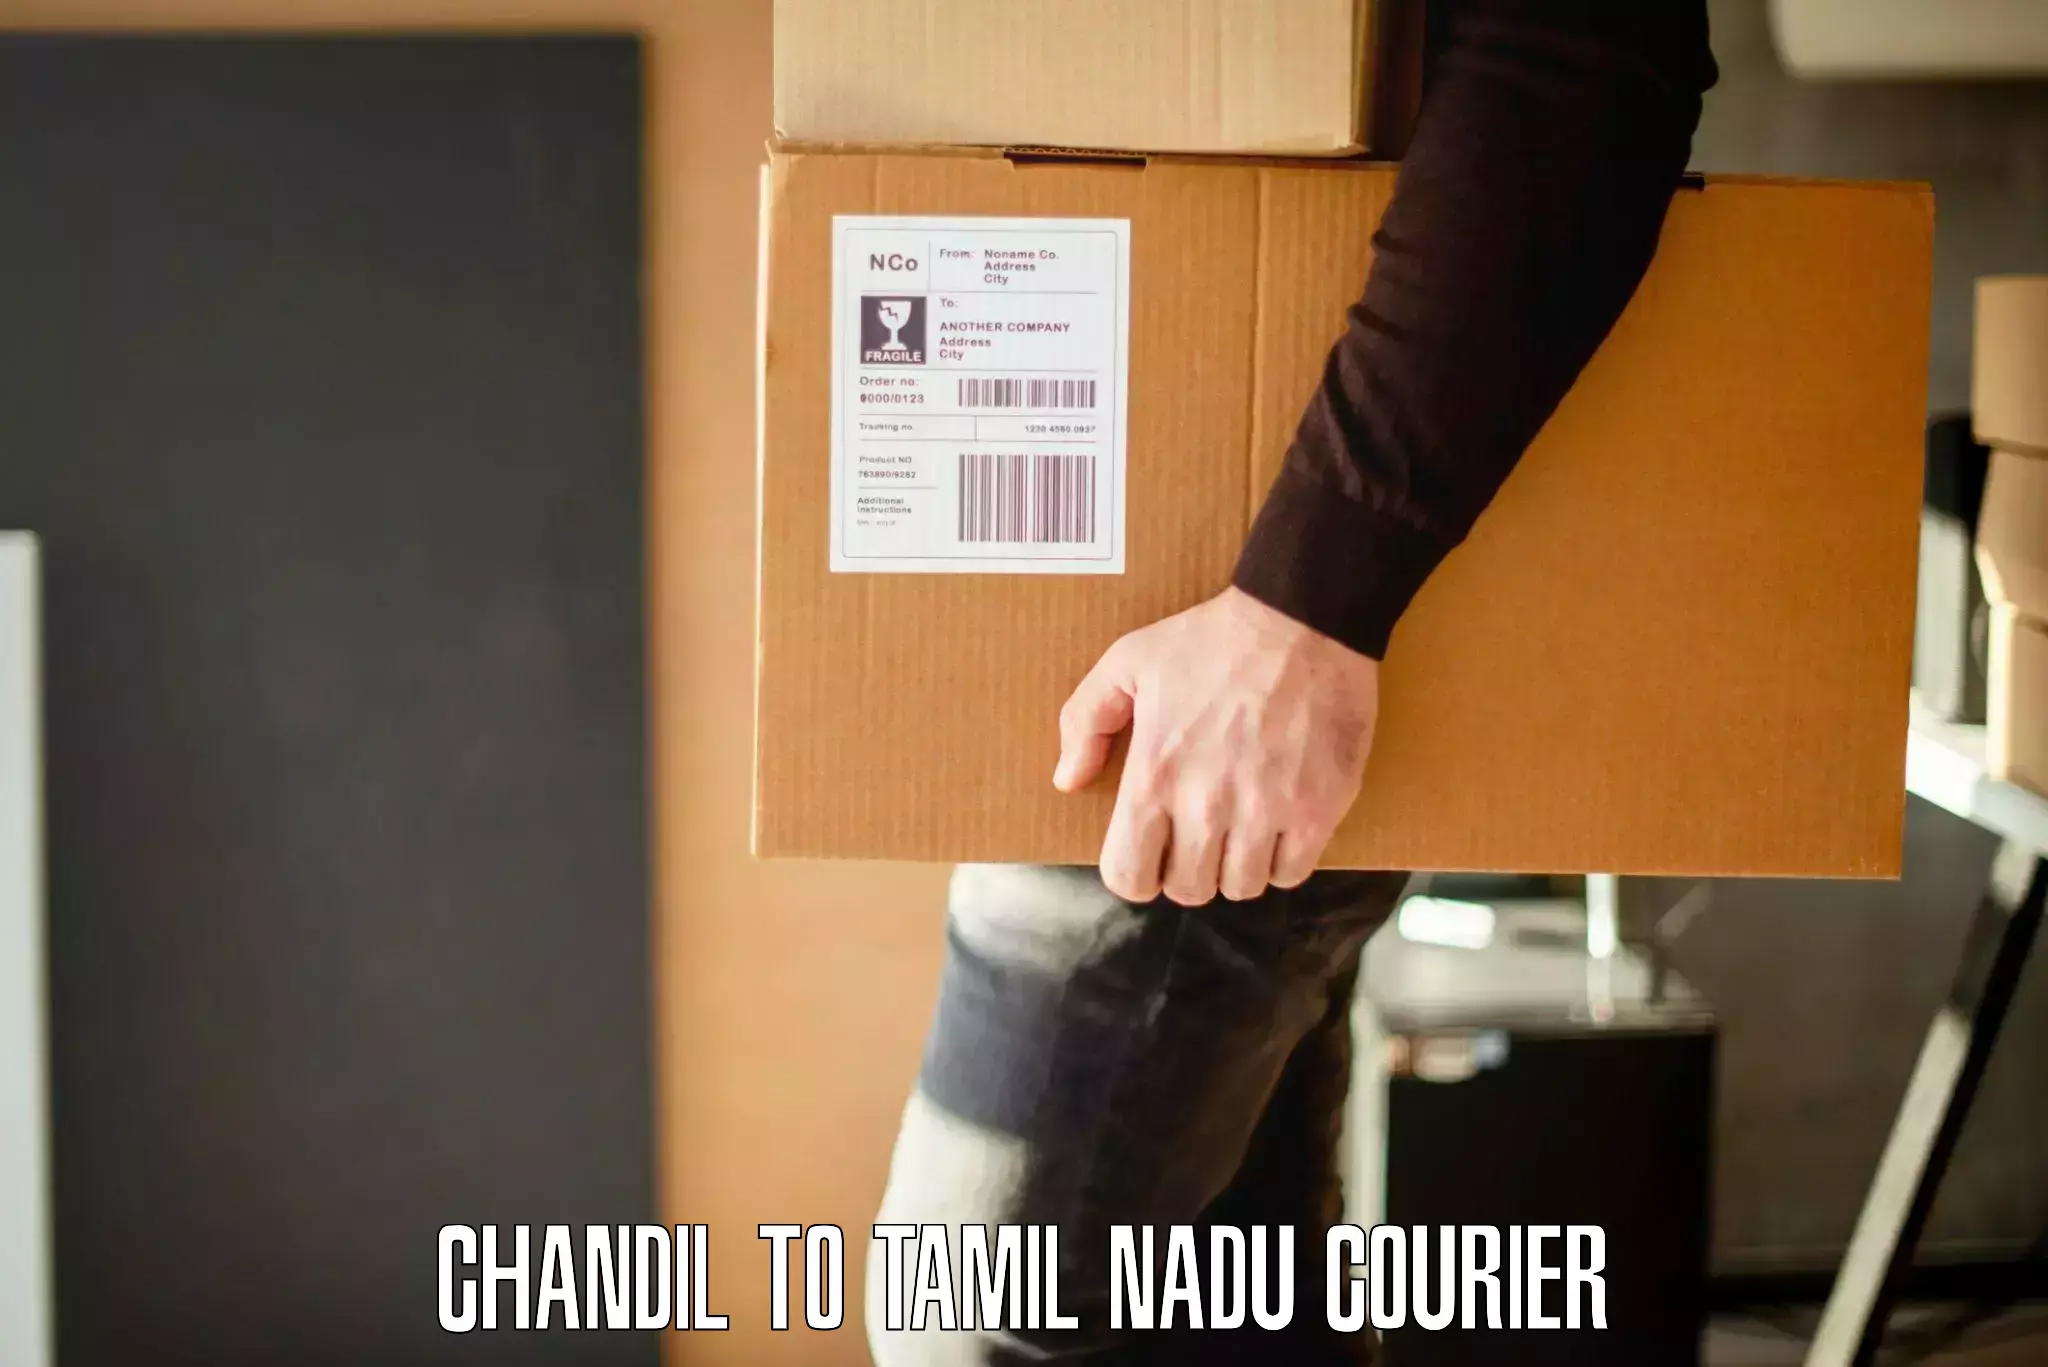 Nationwide household movers Chandil to Perambur